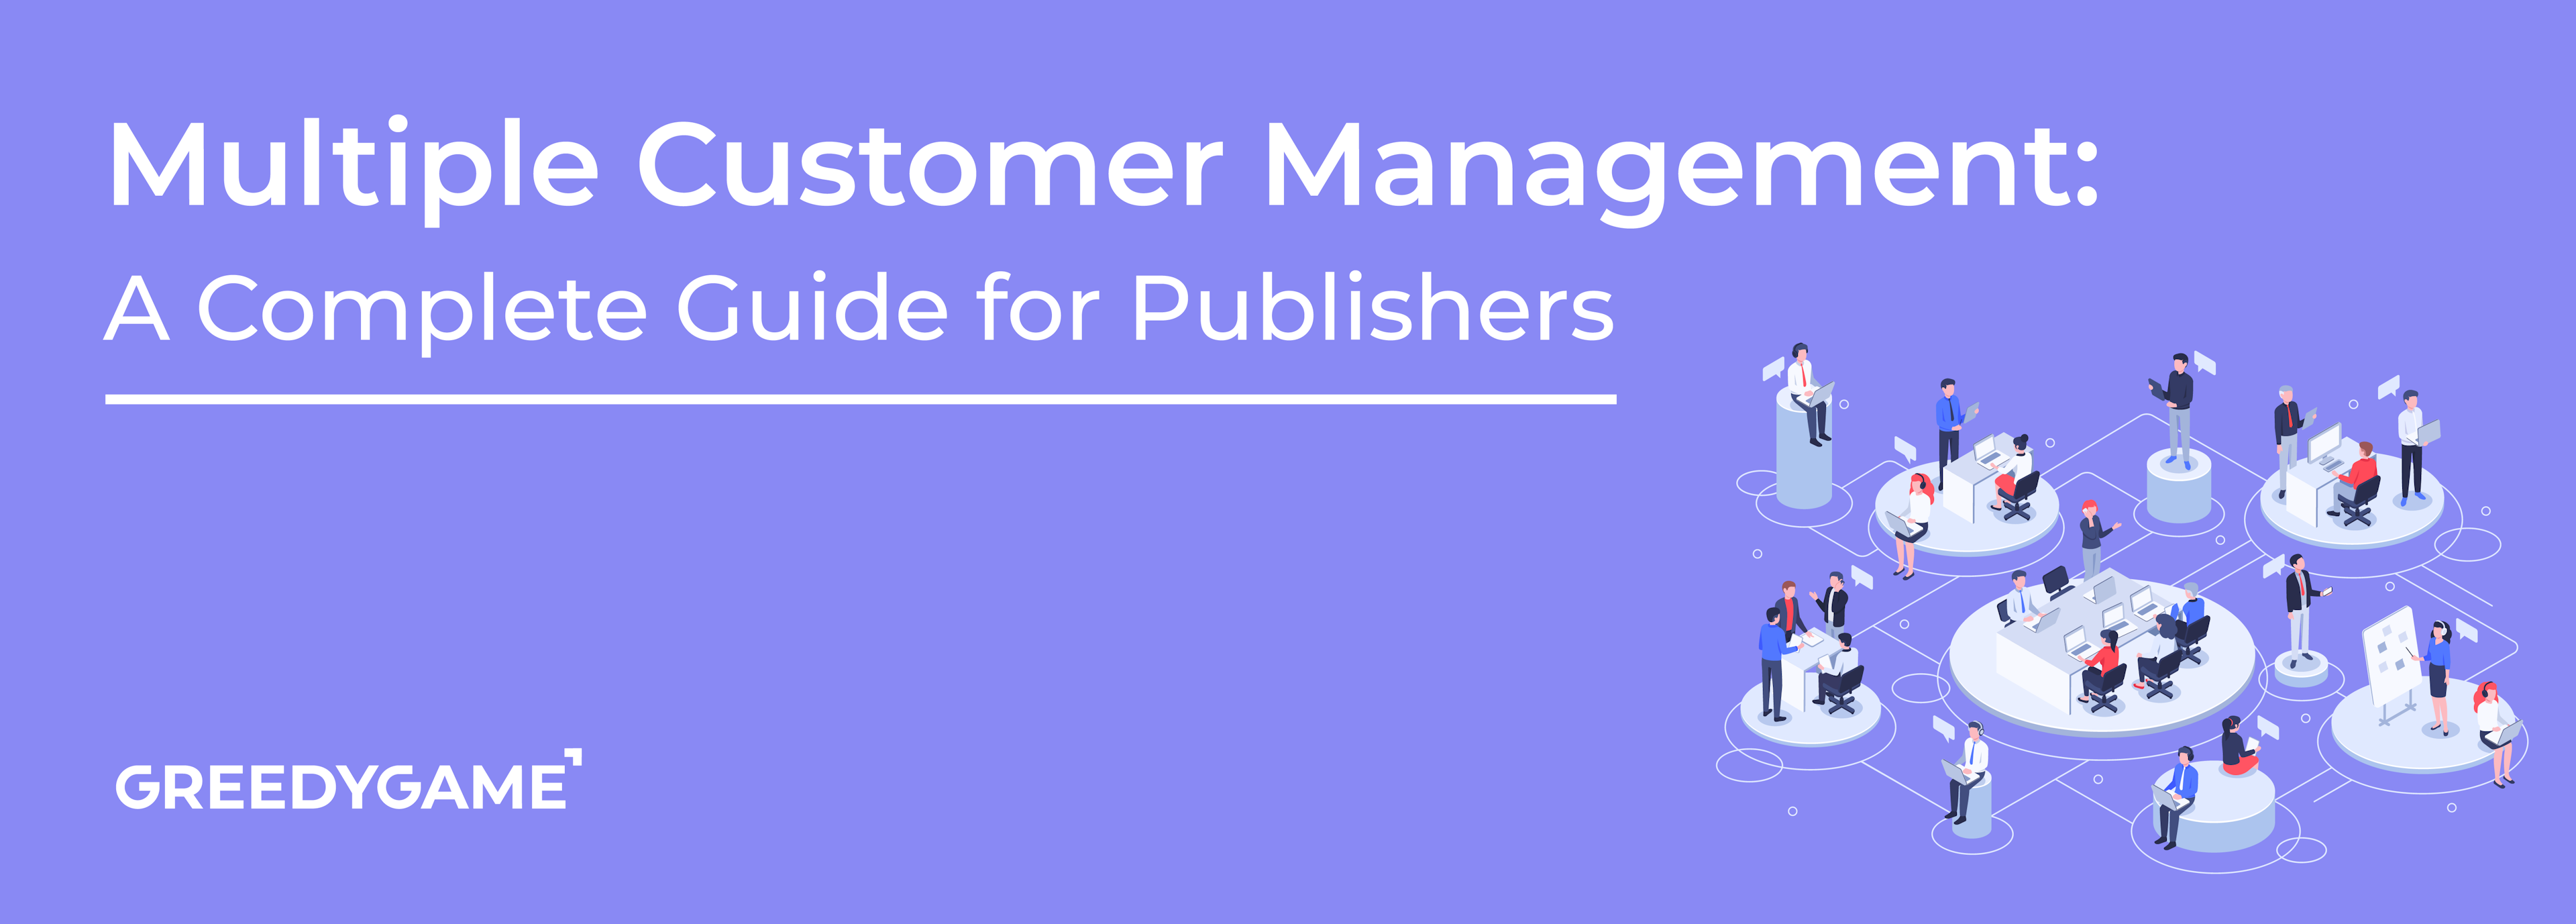 Google Multiple Customer Management - A Complete Guide for Publishers